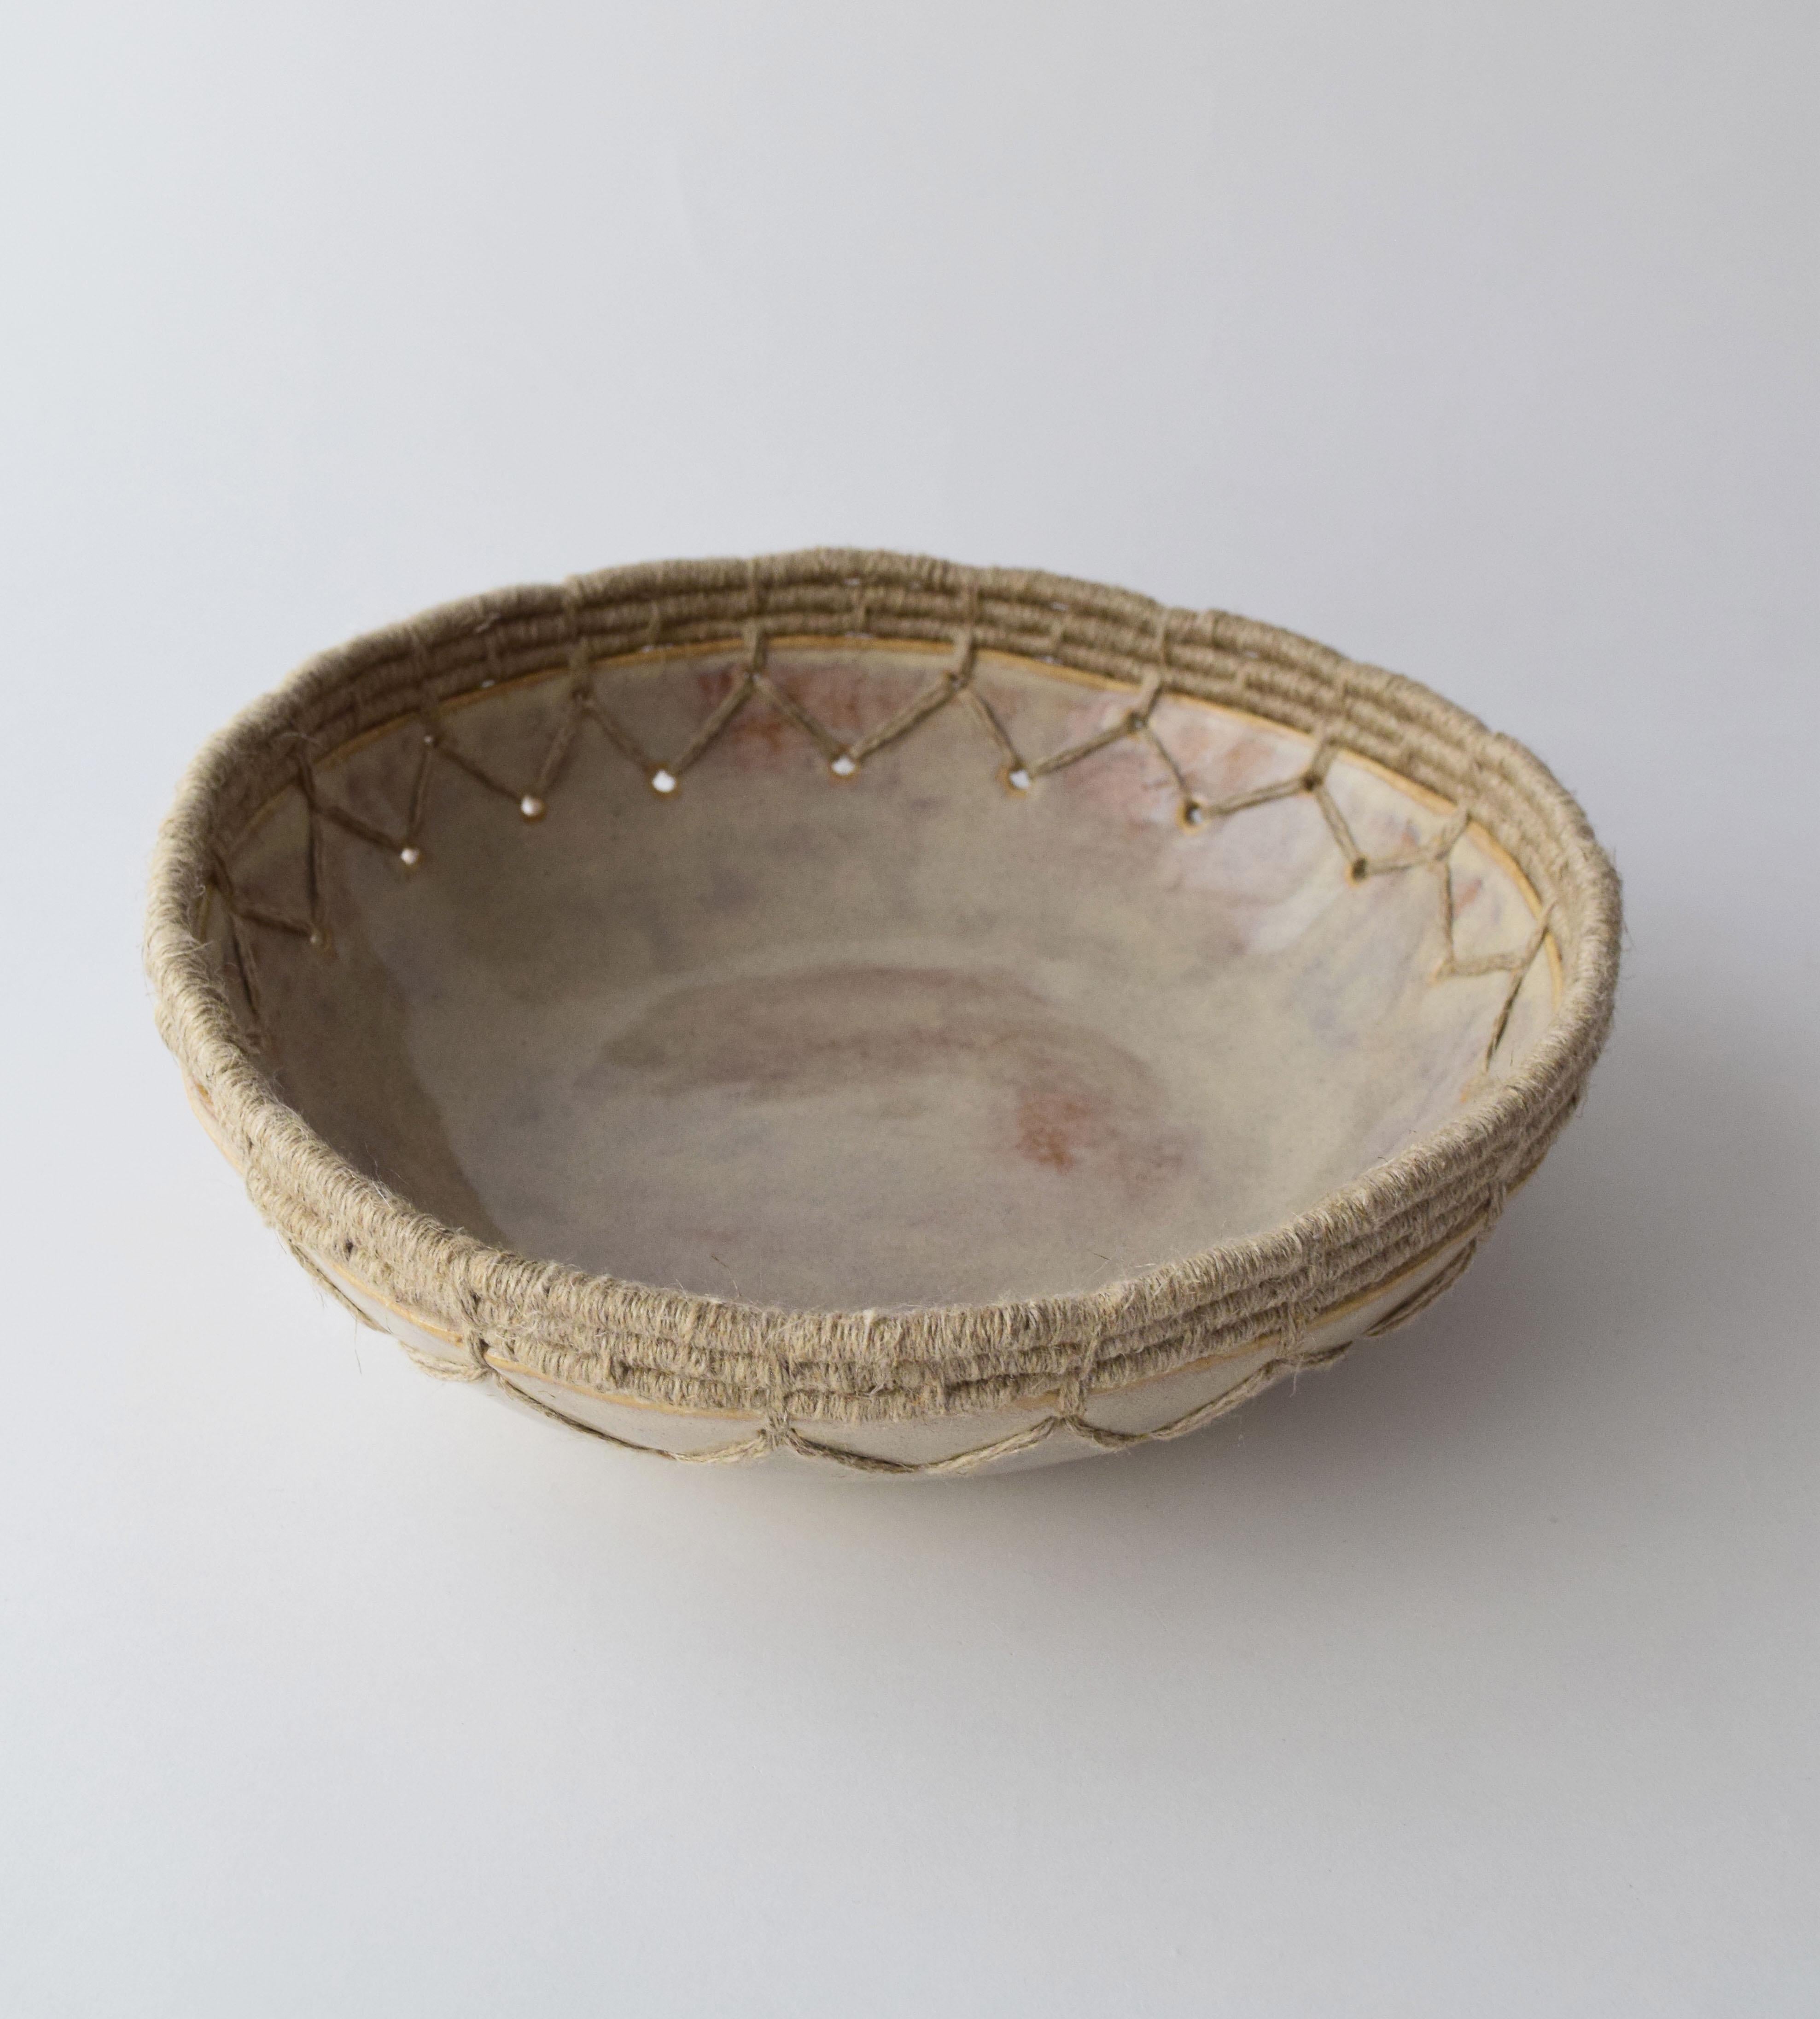 Hand-Crafted Handmade Ceramic Bowl with Gray Glaze, Woven Edge Detail